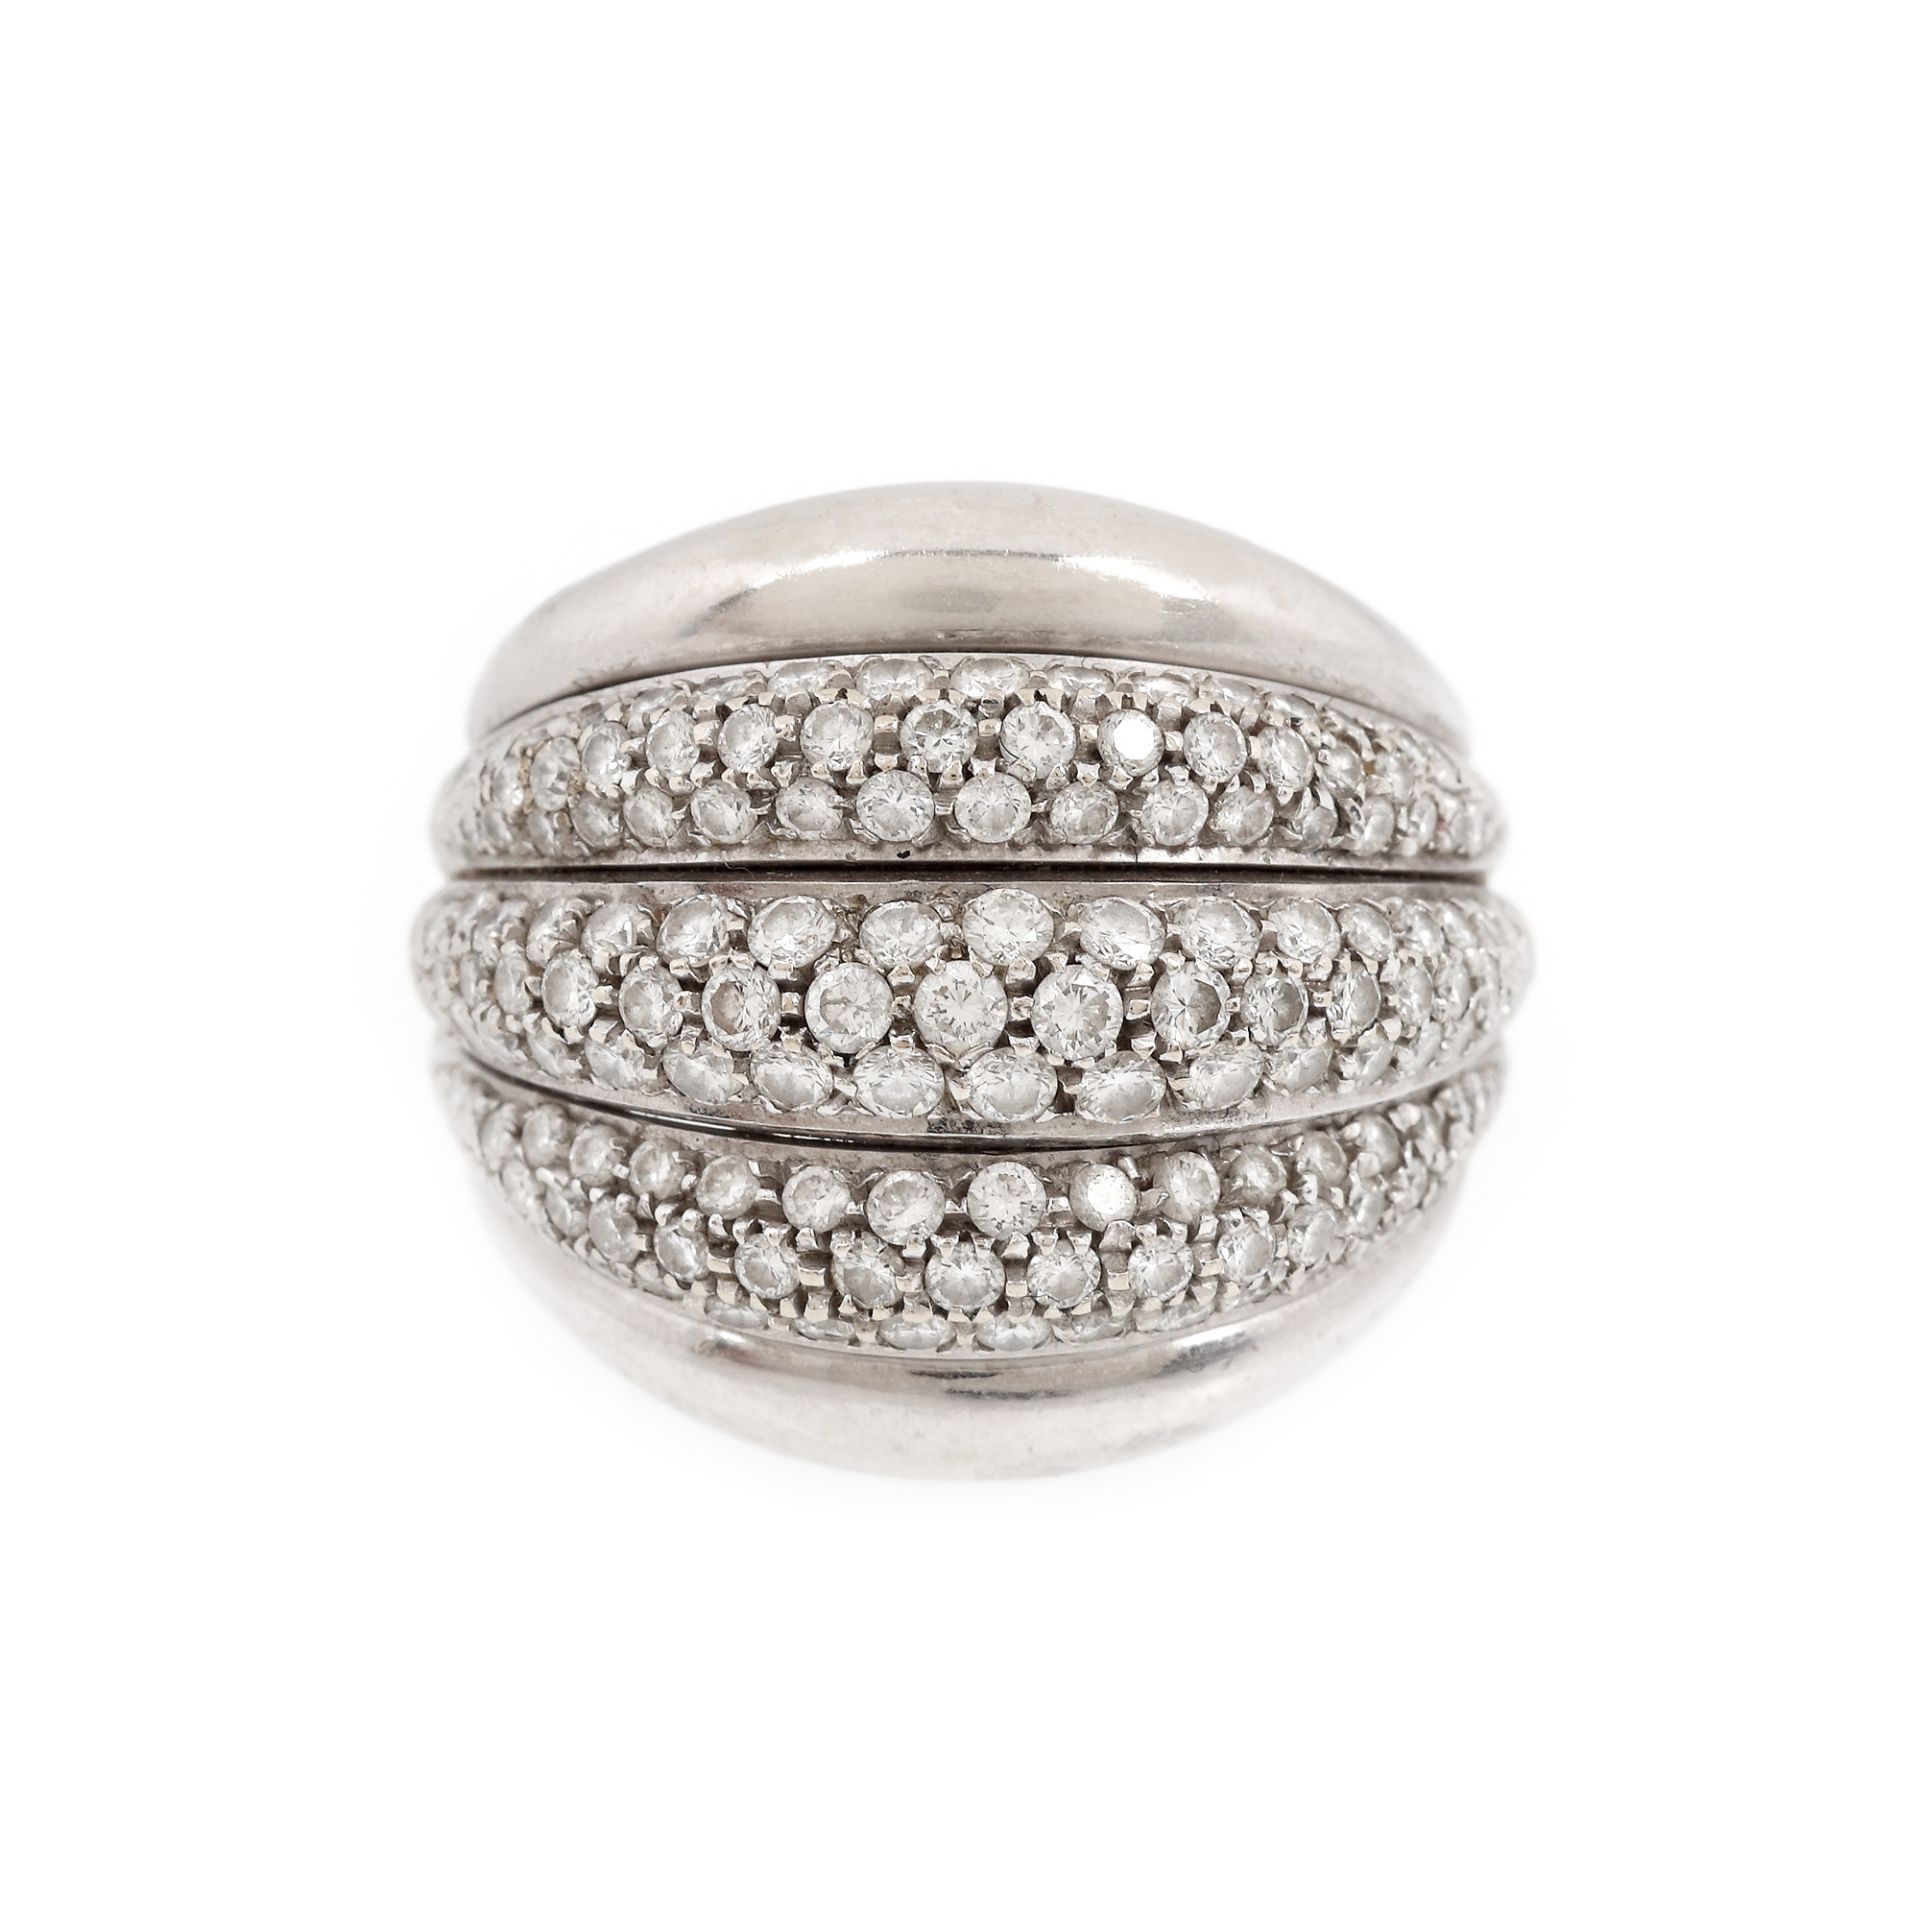 Damiani ring, white gold, decorated with diamonds